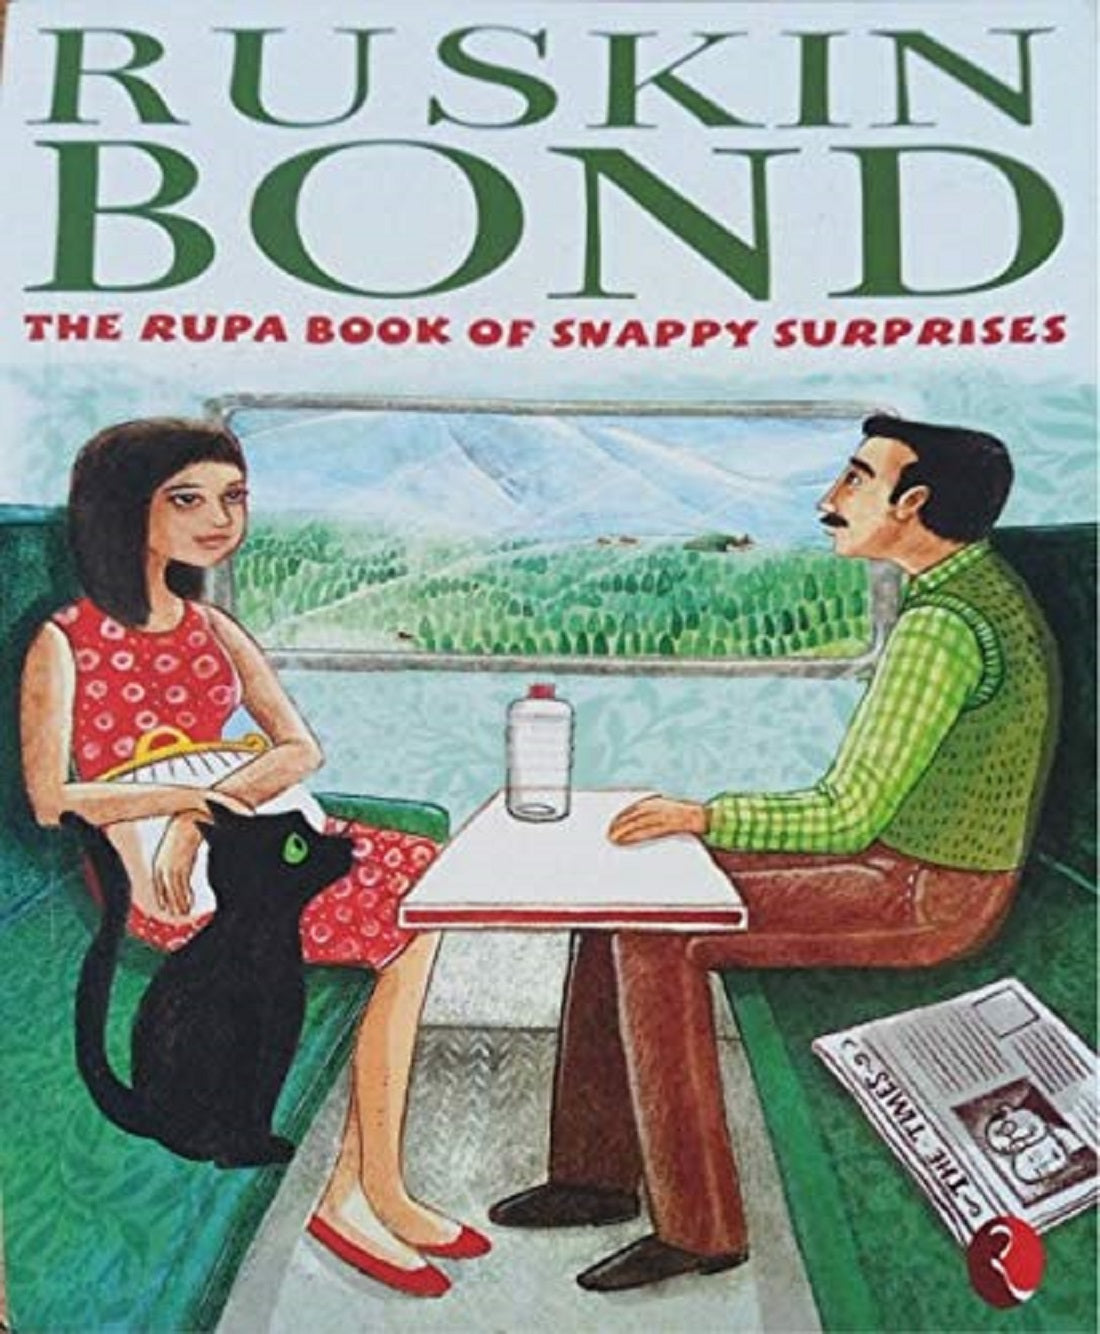 THE RUPA BOOK OF SNAPPY SURPRISES